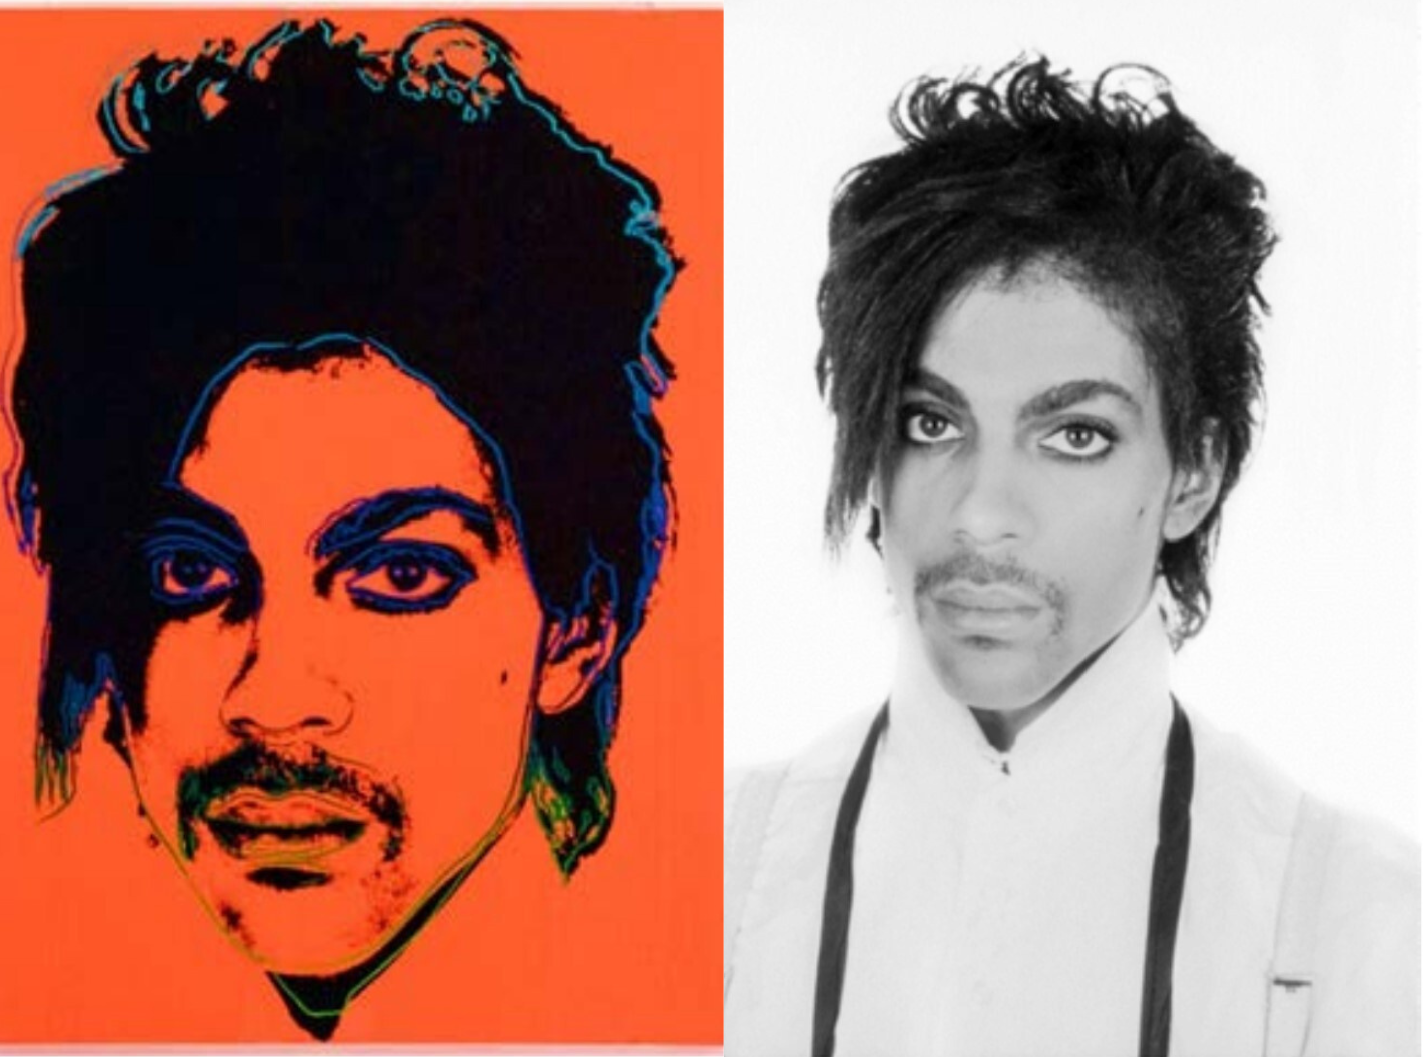 Prince side-by-side